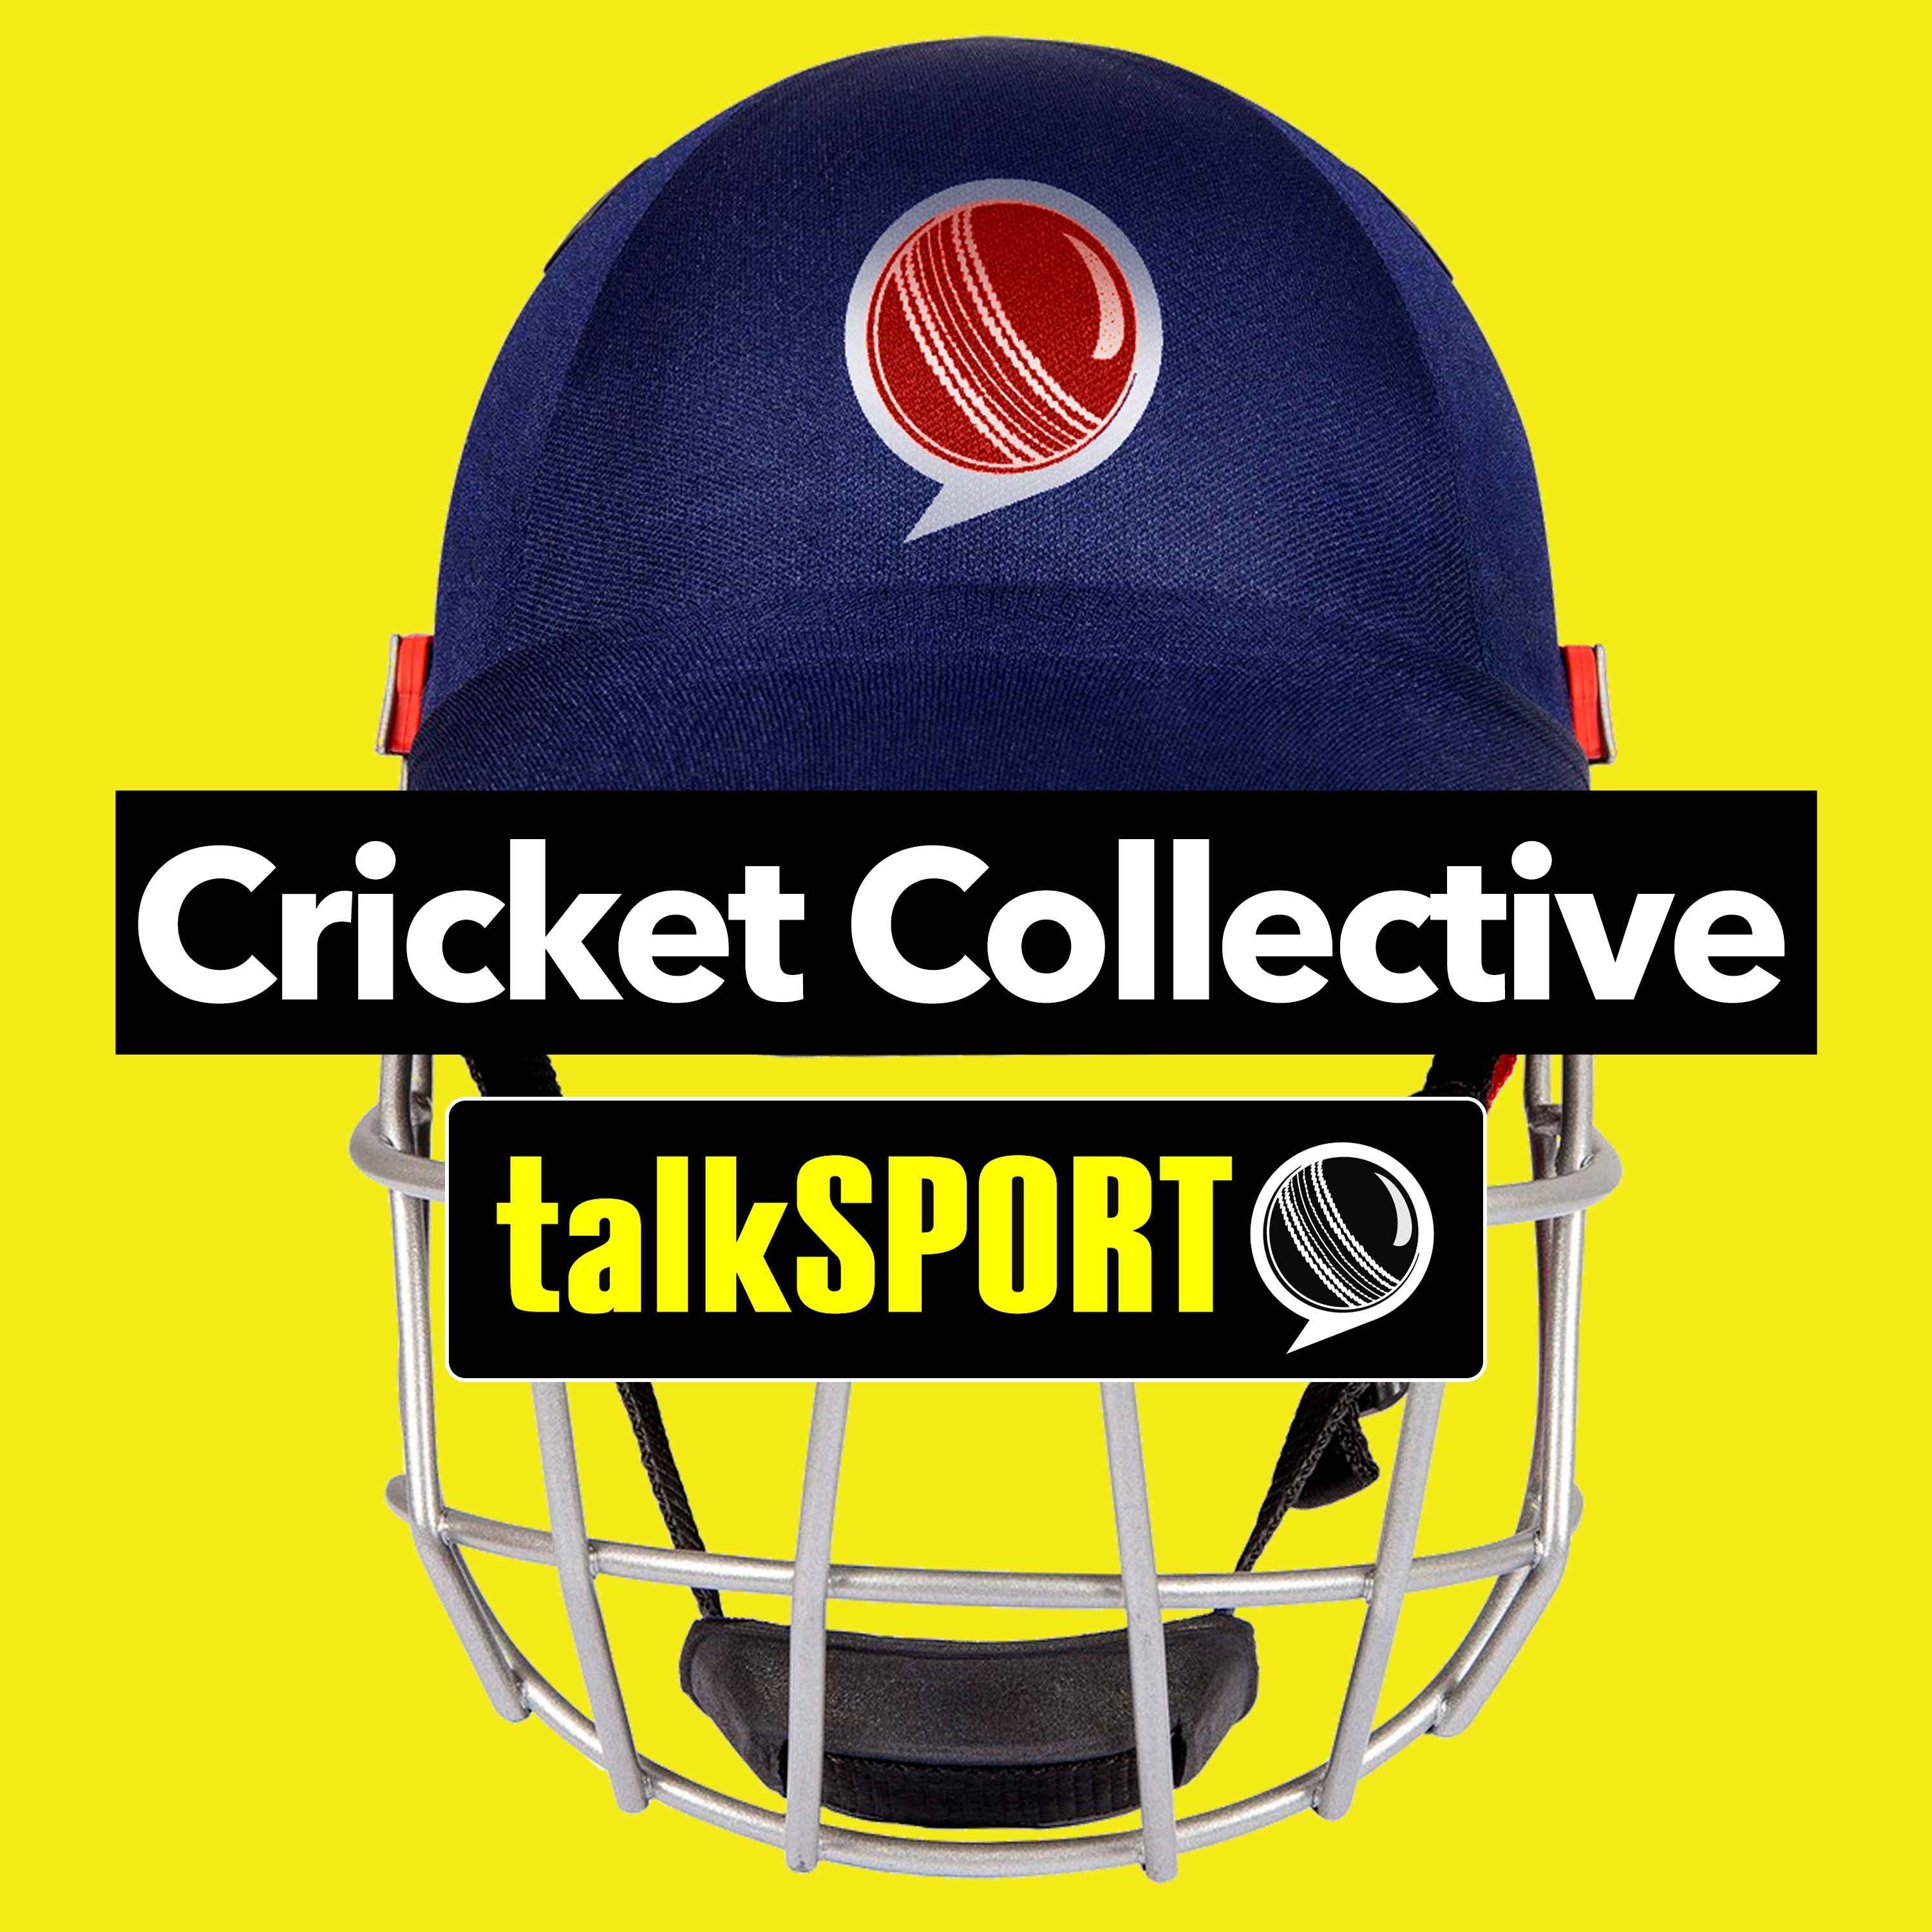 The Cricket Collective - Leach's Ashes Blow; Stokes' Knee Concerns & Warner Sets Retirement Date